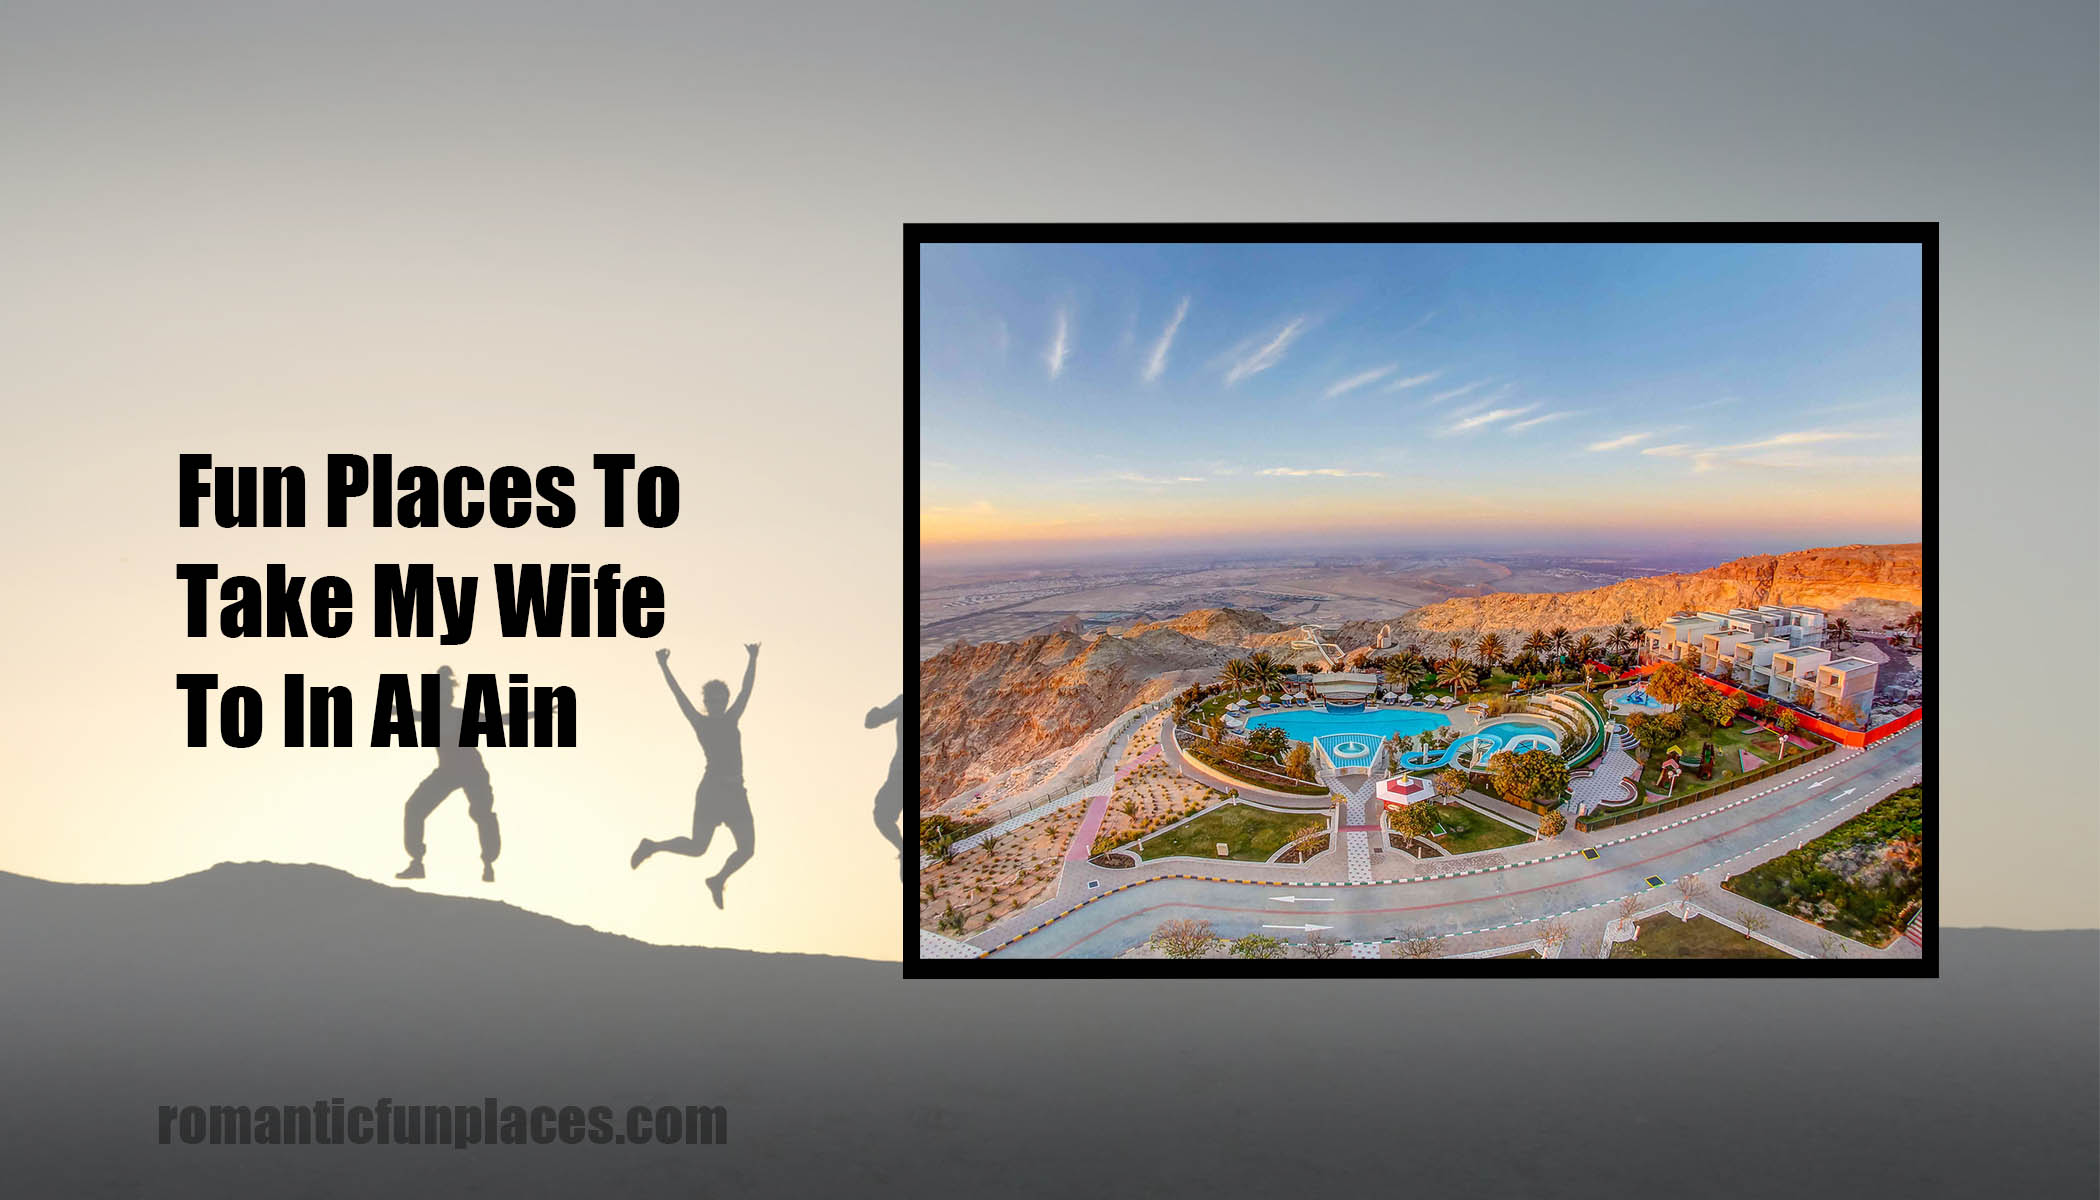 Fun Places To Take My Wife To In Al Ain